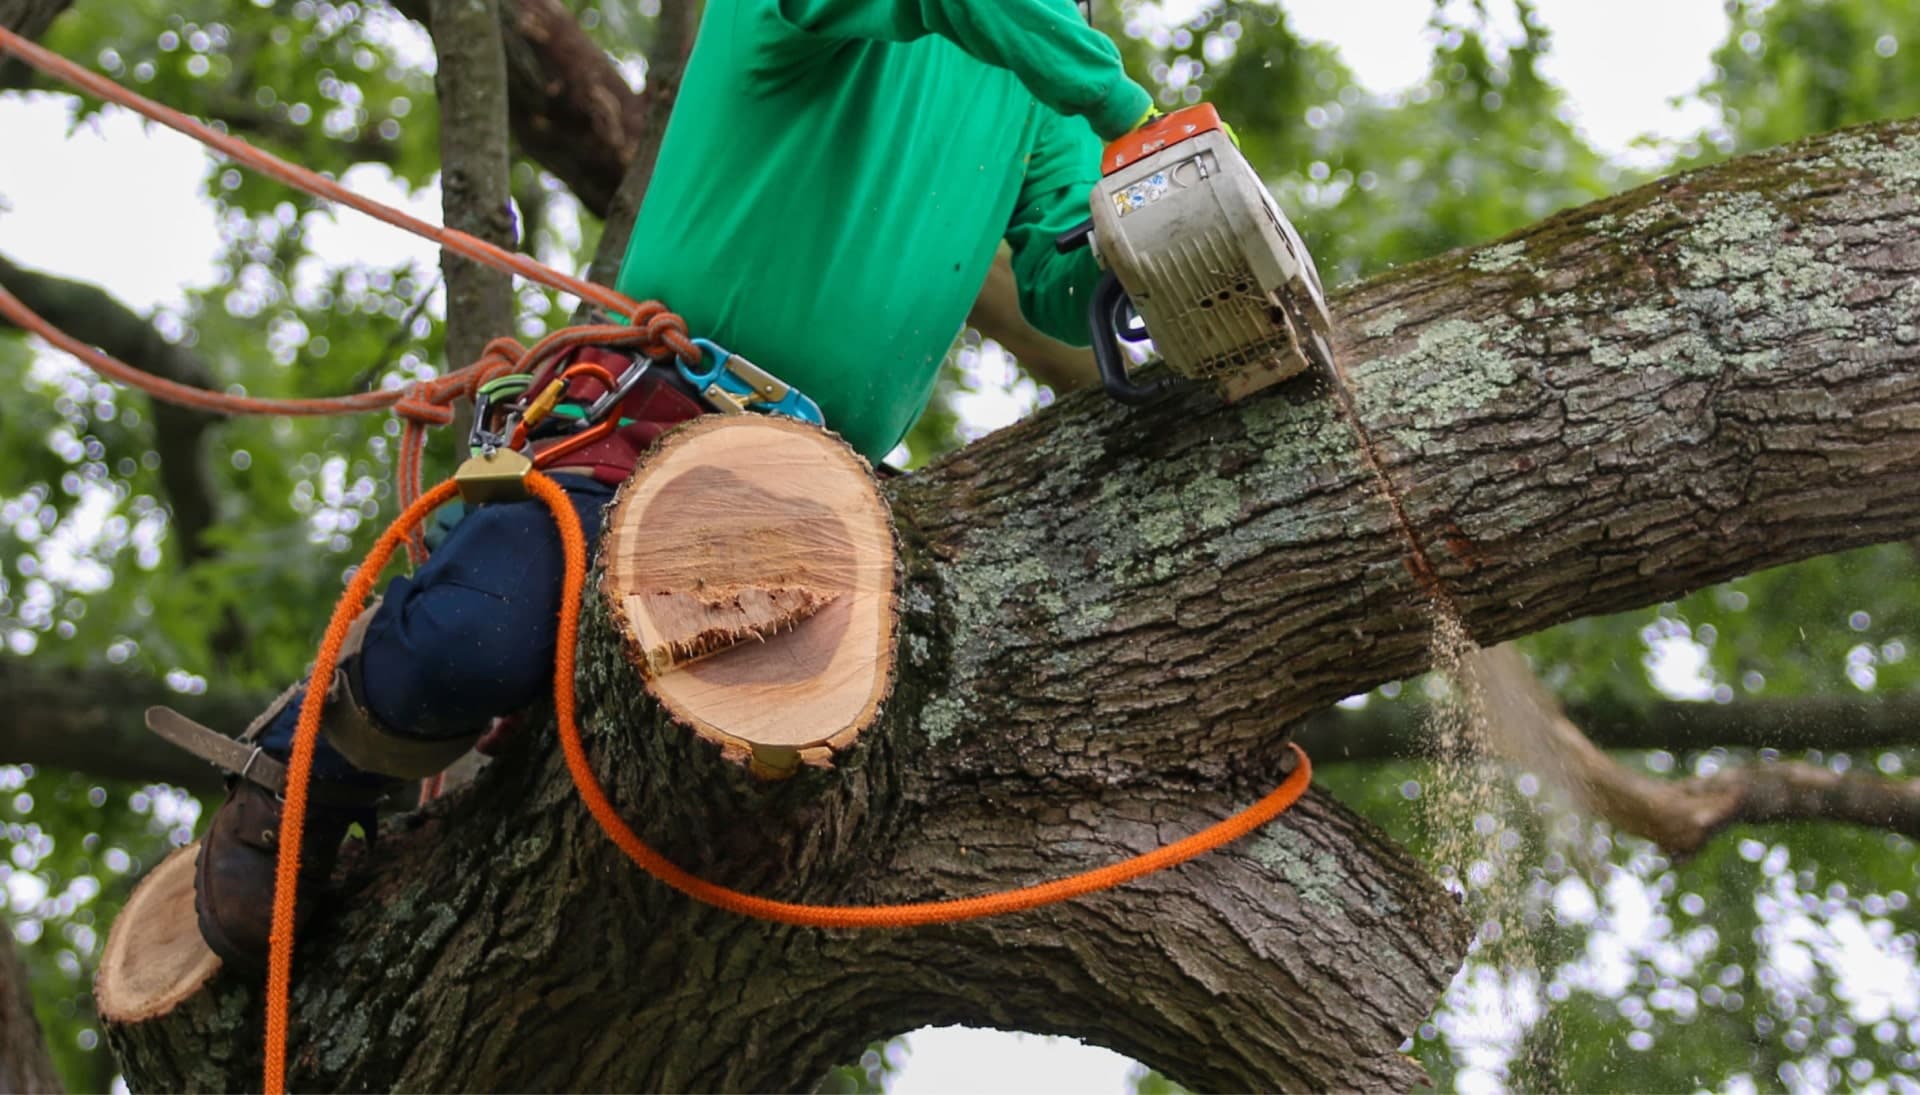 Shed your worries away with best tree removal in Fairfax